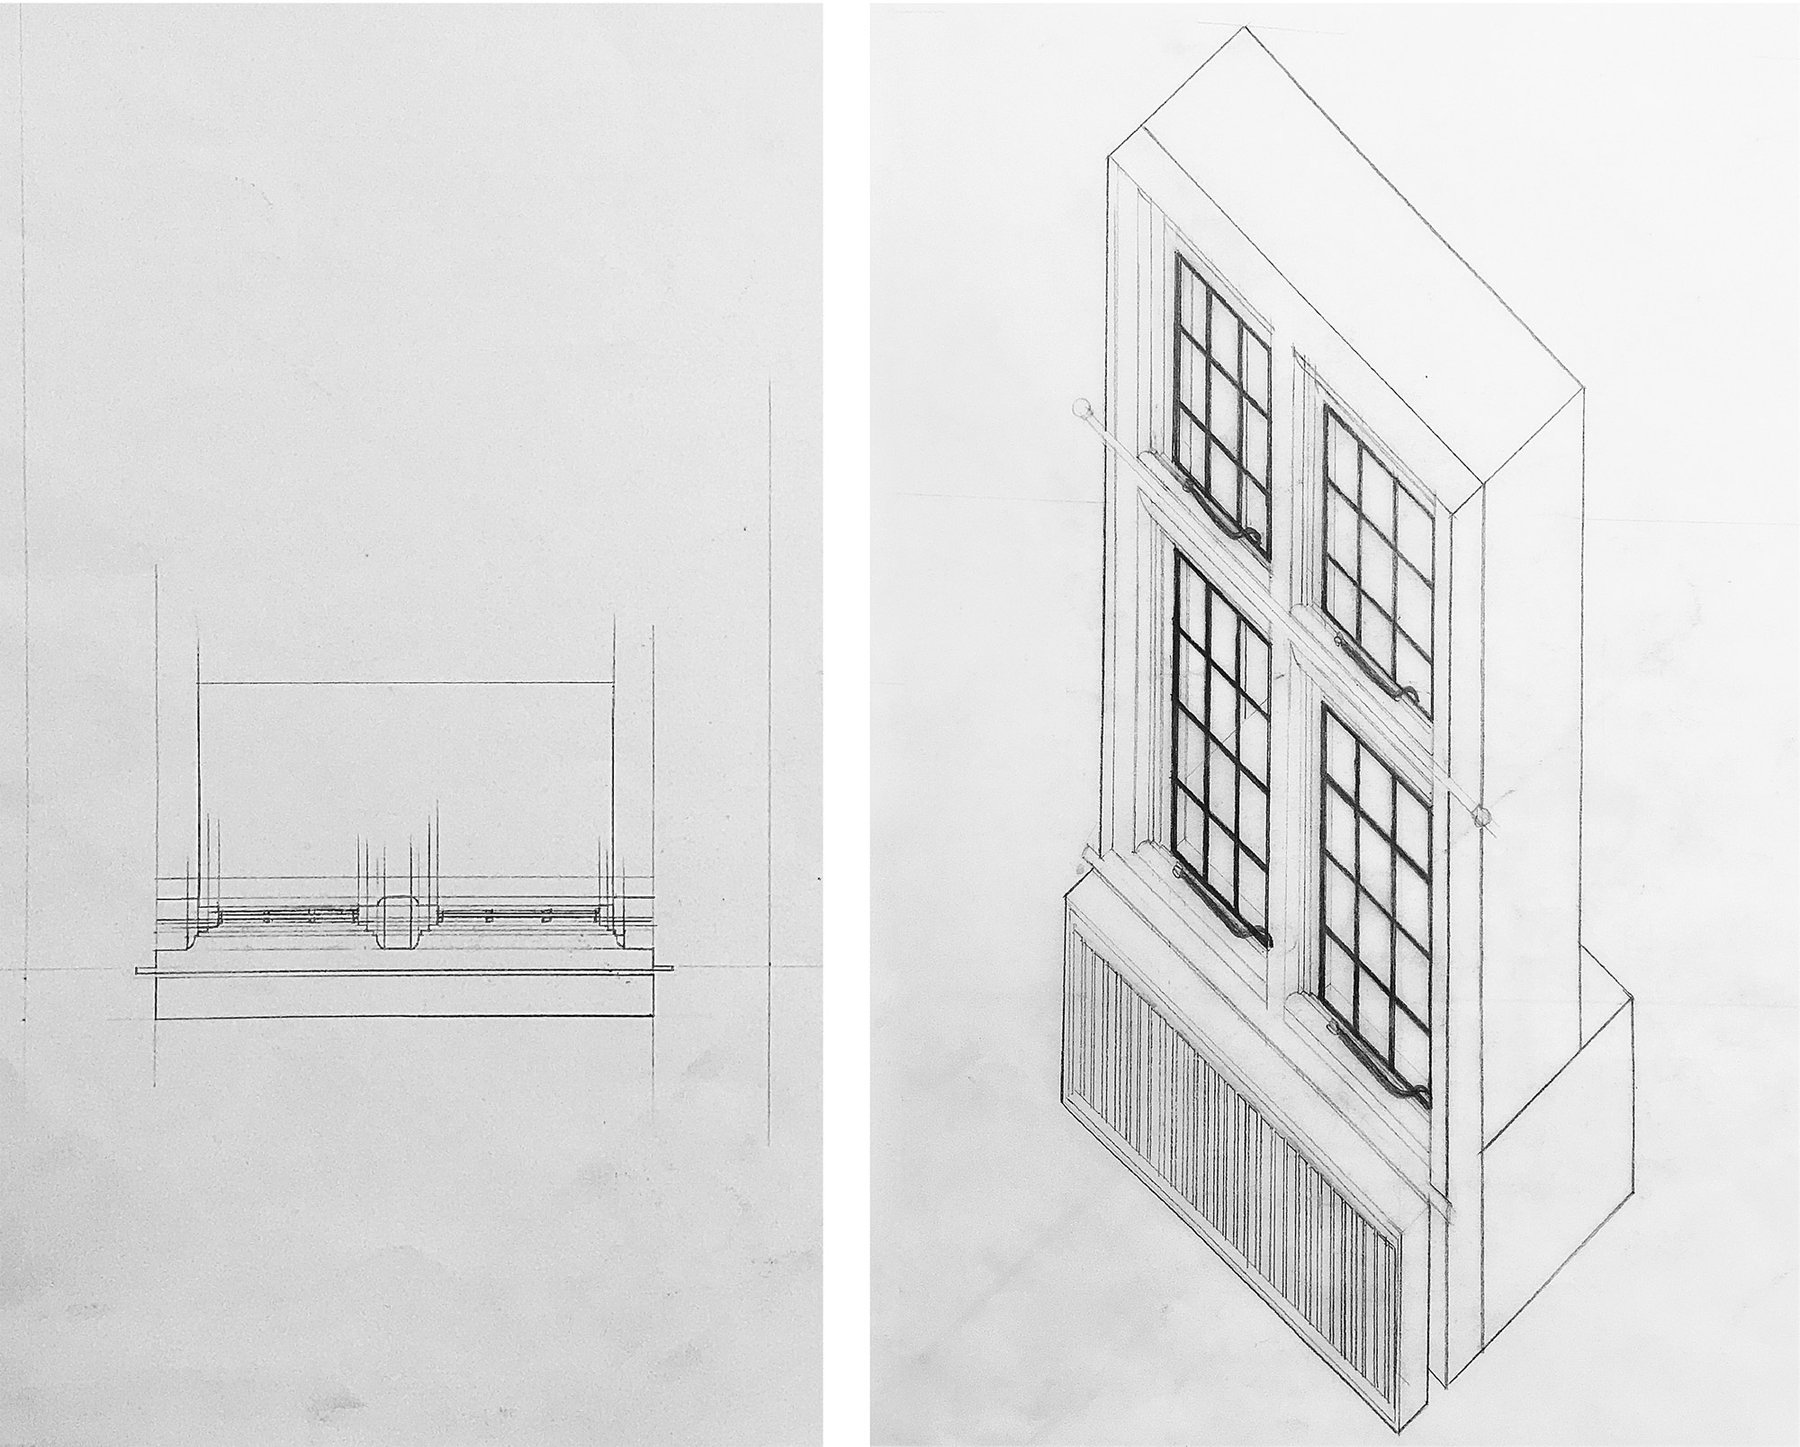 Two images are shown. A plan of a window on the left and an axonometric of the same window next to it. Pencil drawing